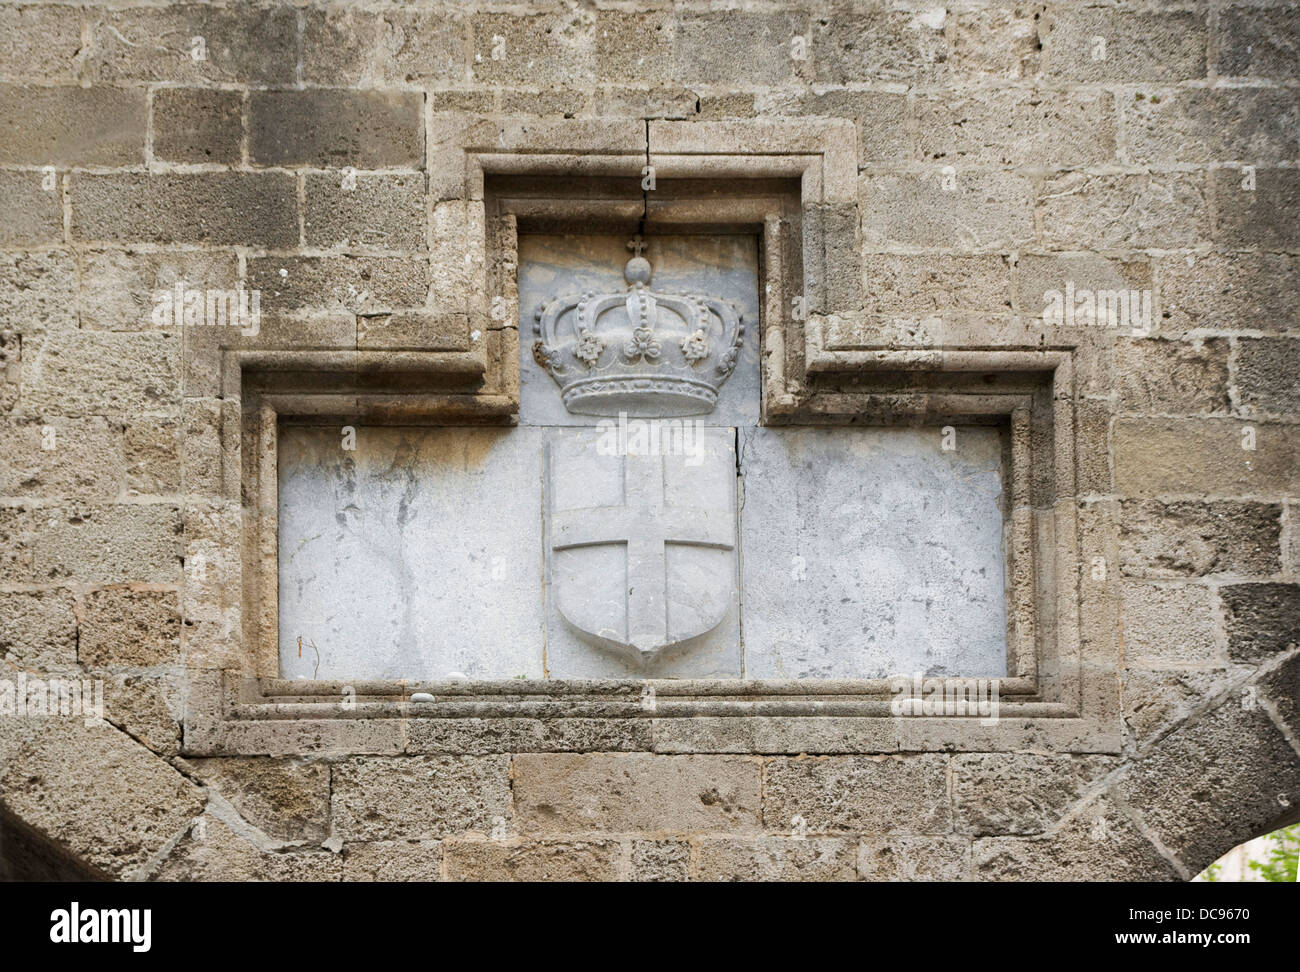 The royal Coat of Arms of the House of Savoy on the city walls of Rhodes, Greece, during the italian occupation of the island. Stock Photo